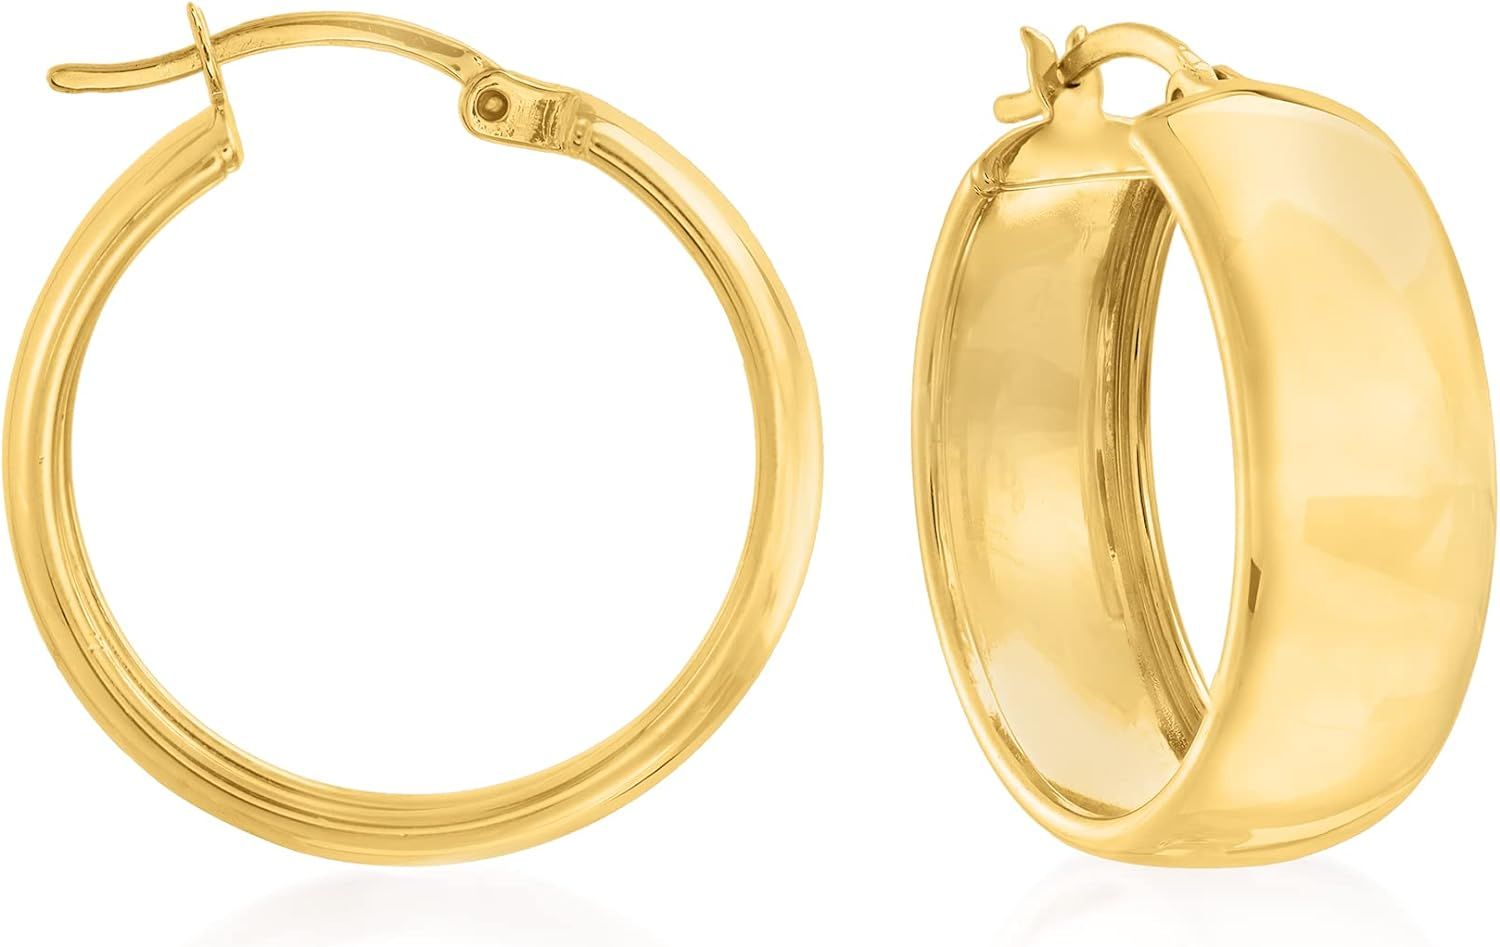 Ross-Simons 18kt Yellow Gold Over Sterling Silver Hoop Earrings | Amazon (US)